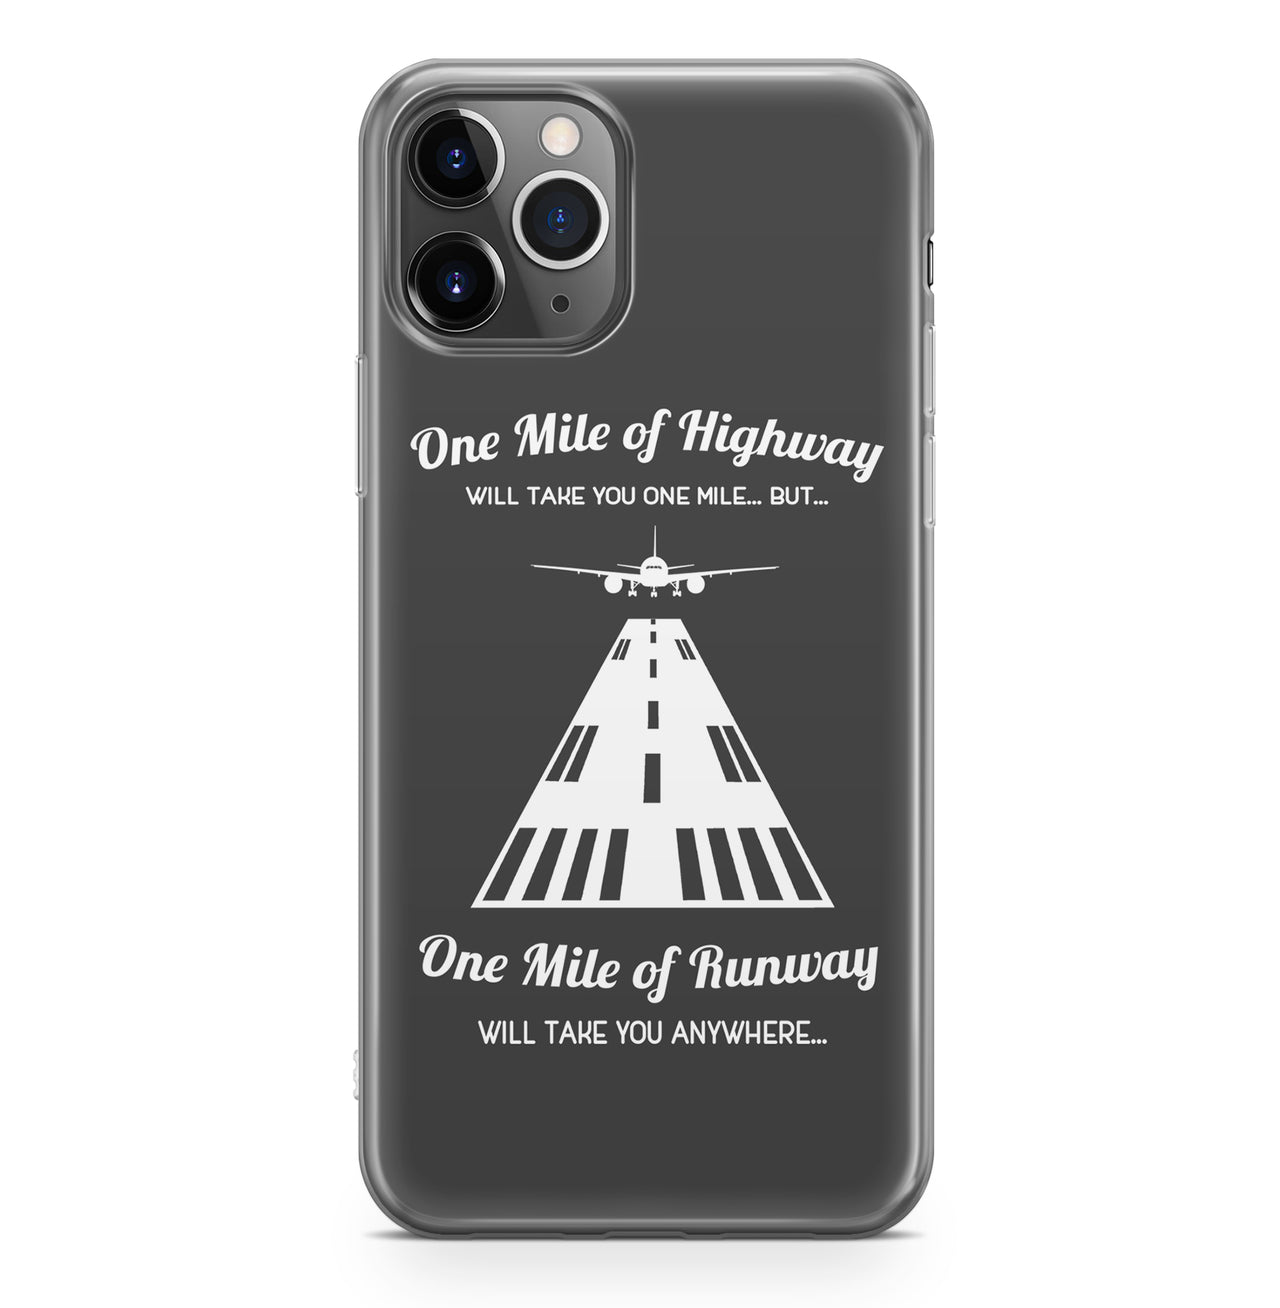 One Mile of Runway Will Take you Anywhere Designed iPhone Cases